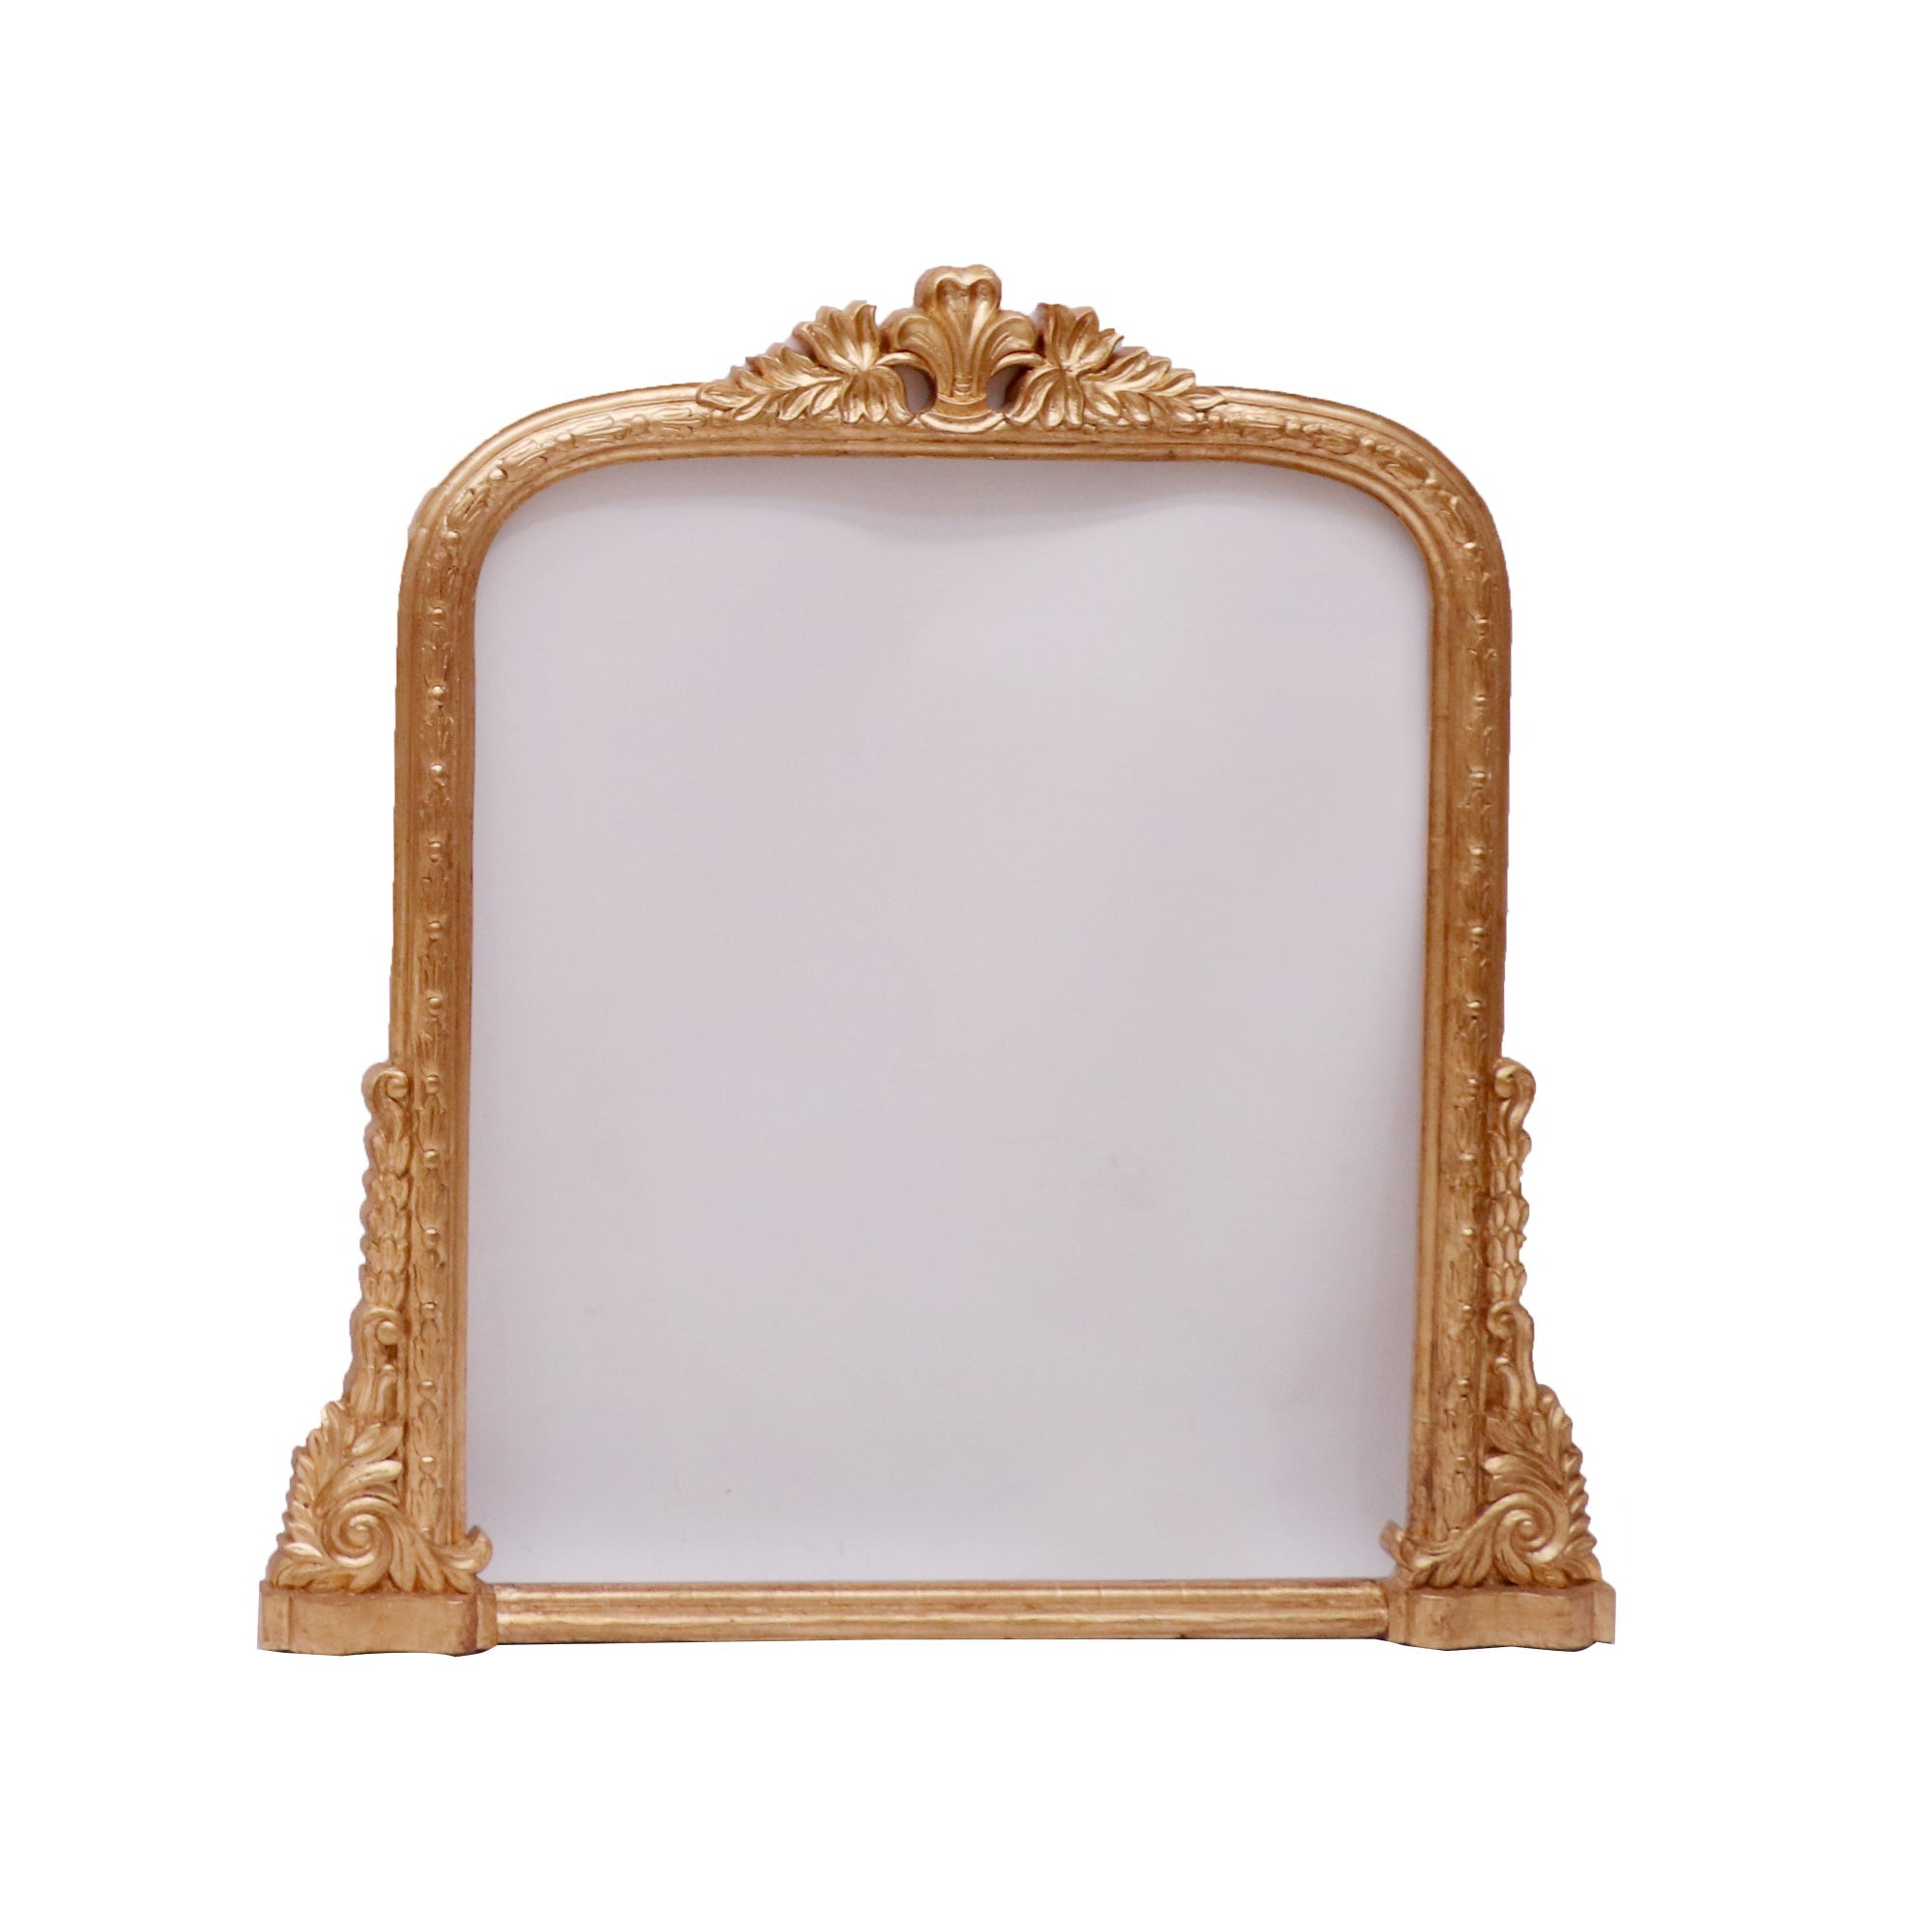 Golden French Royal wide Mirror Mirror